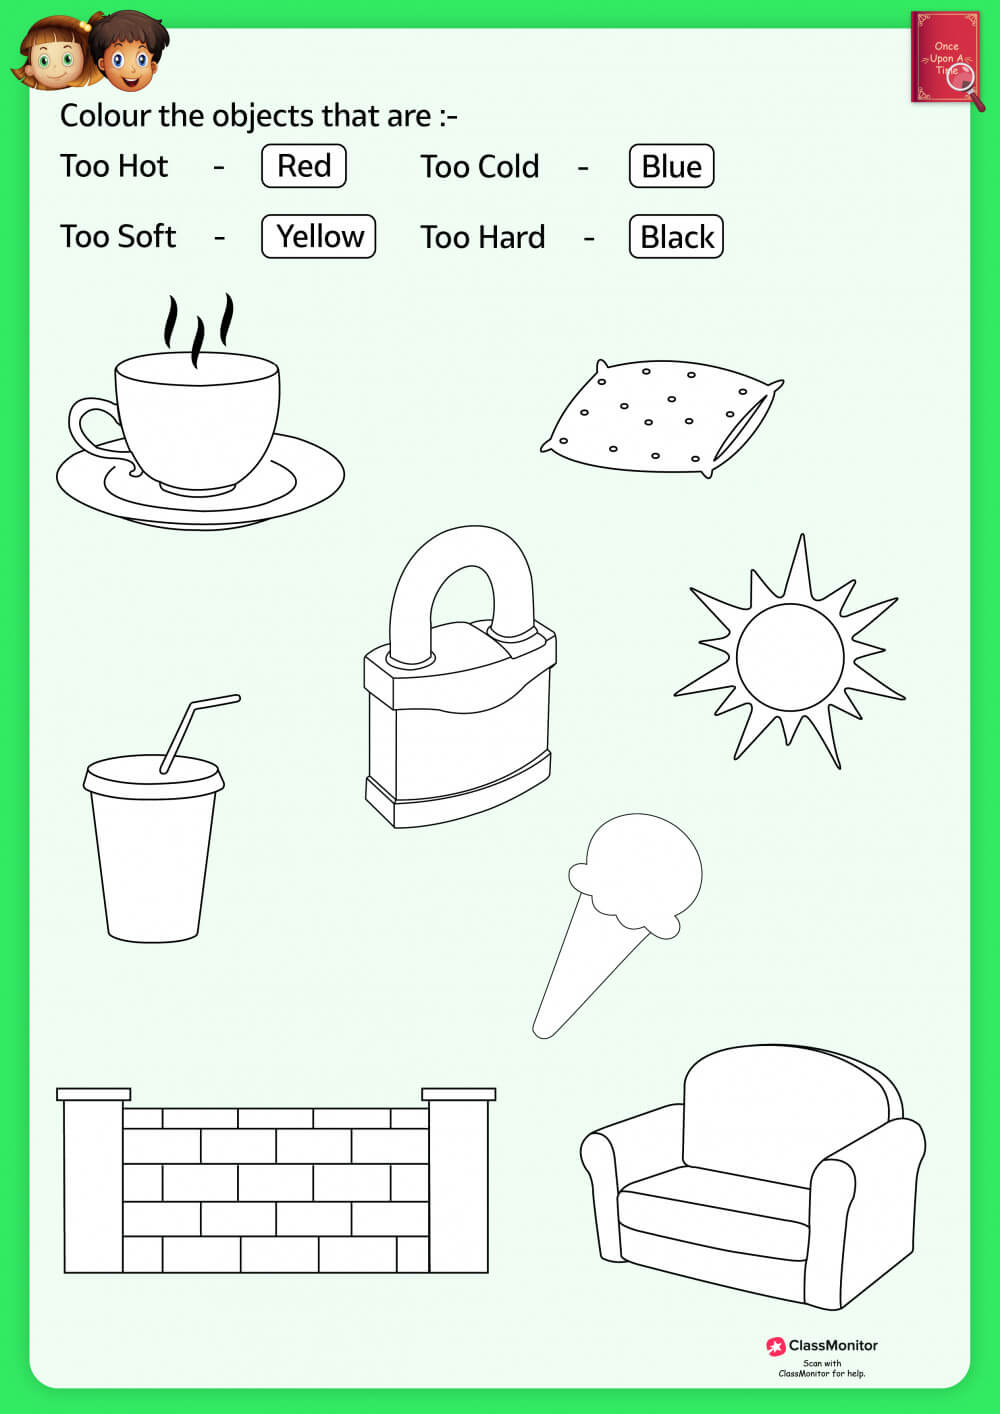 Worksheet - Sort The Objects